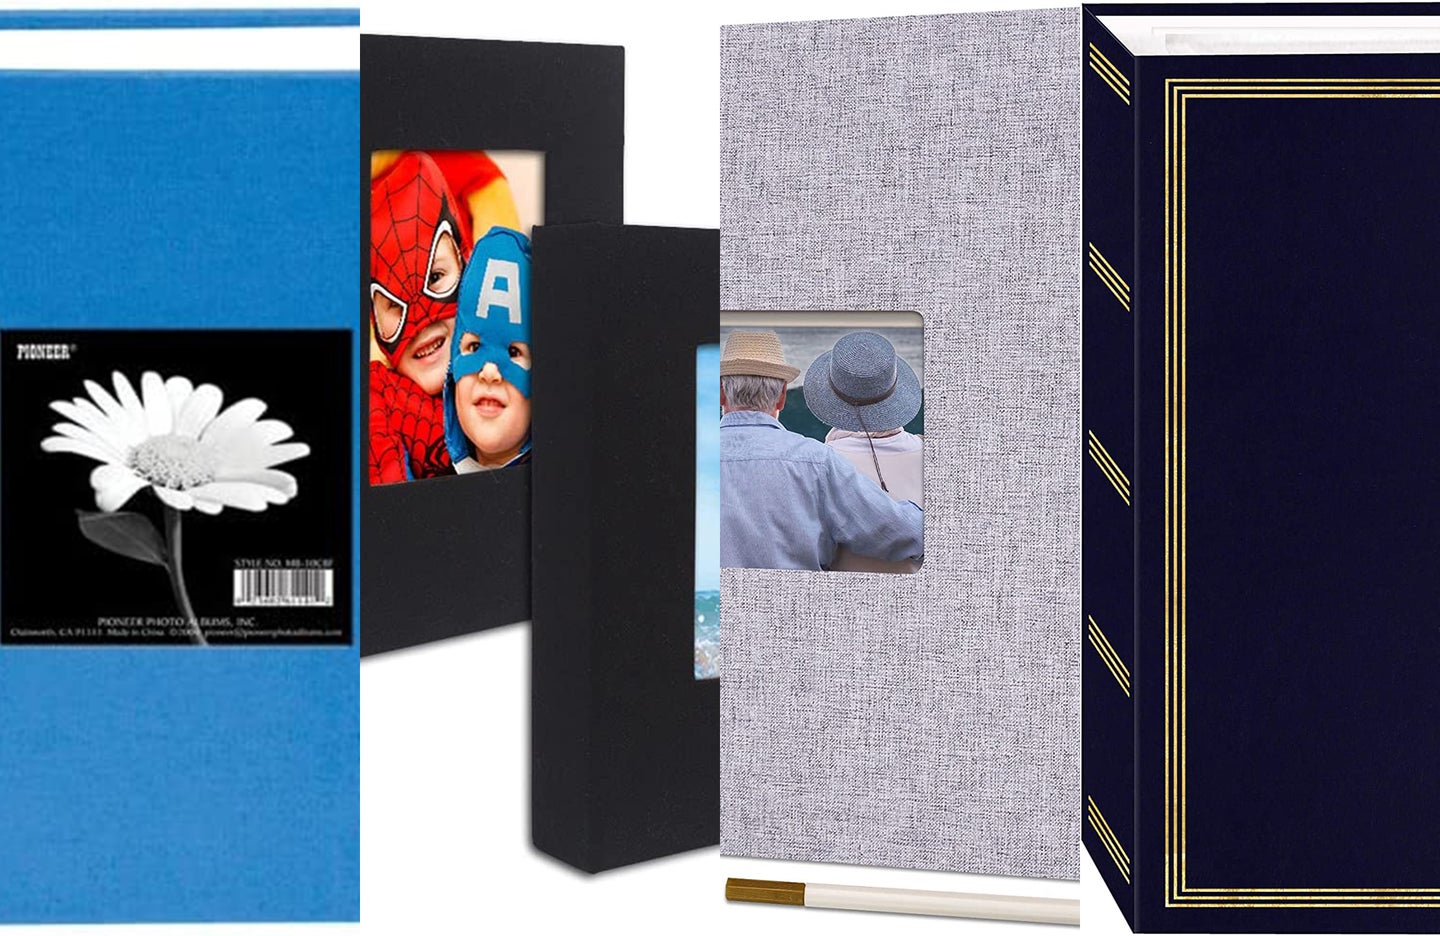 Small Photo Album 4x6 Photos Black Inner Page with Strong Elastic Band,  Each